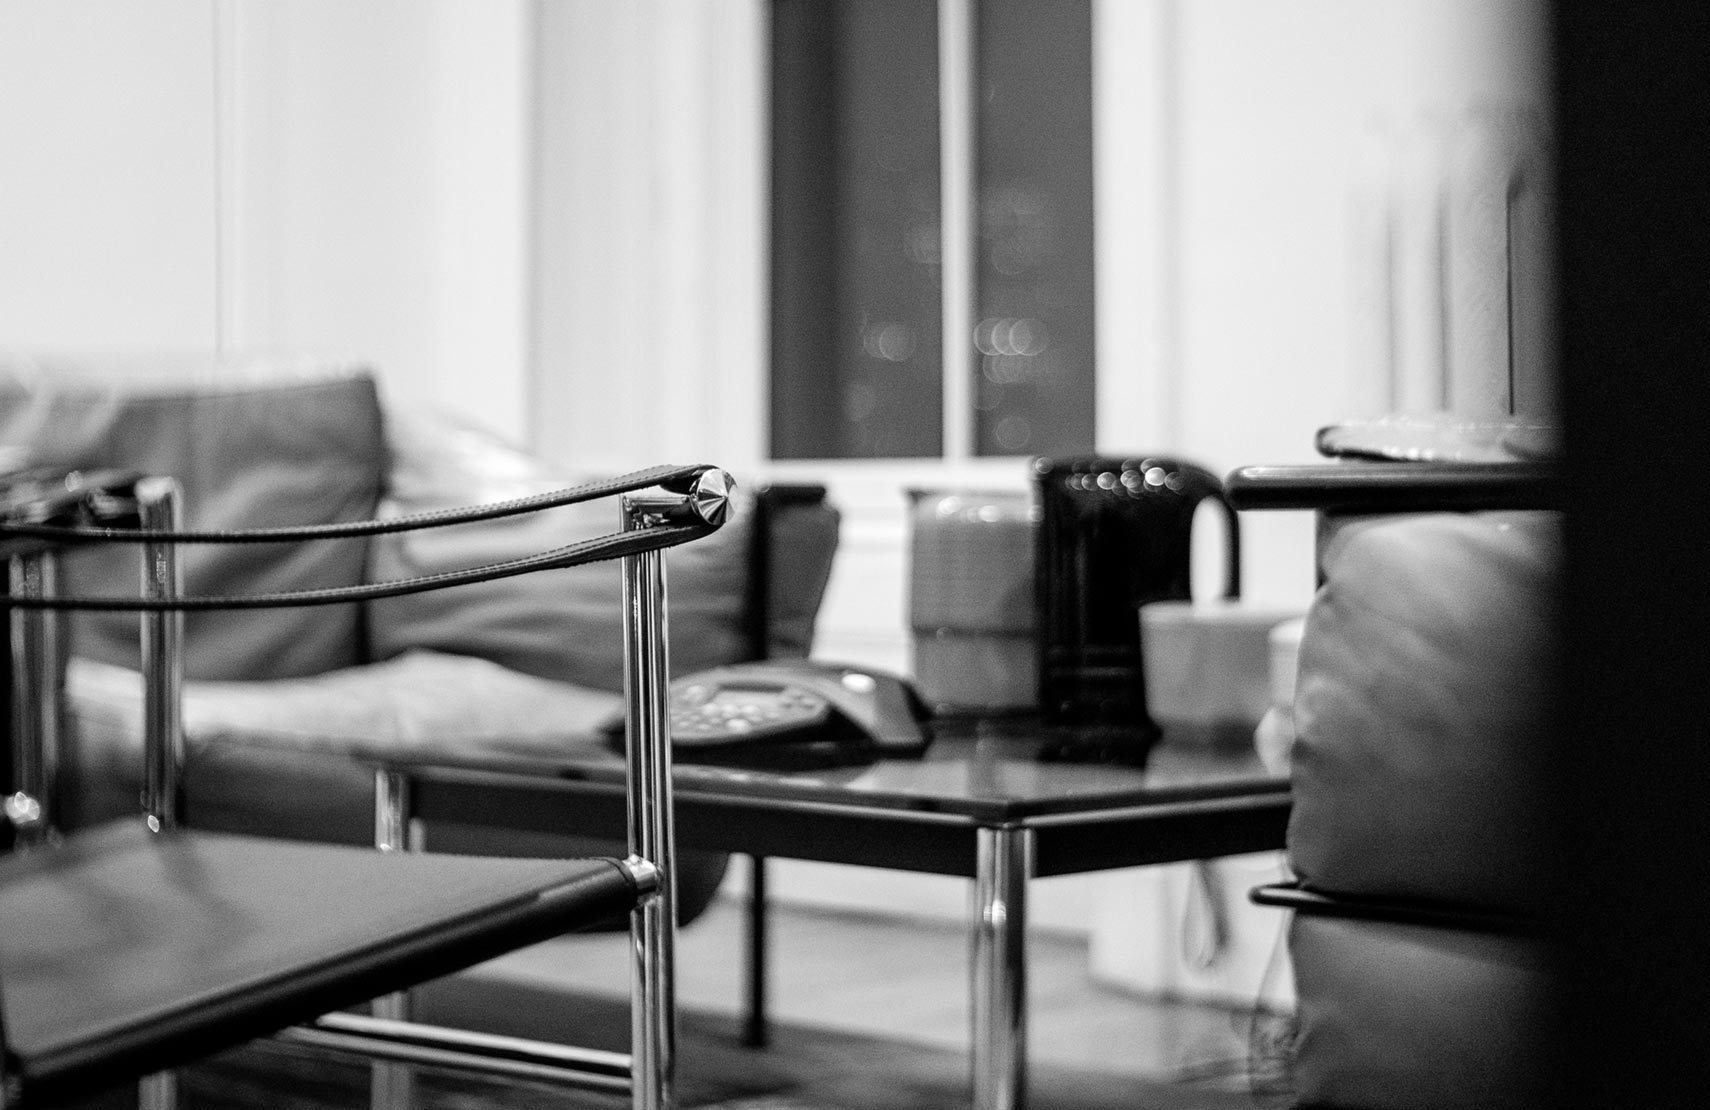 Table and chairs in Roger Sametz's office in black and white